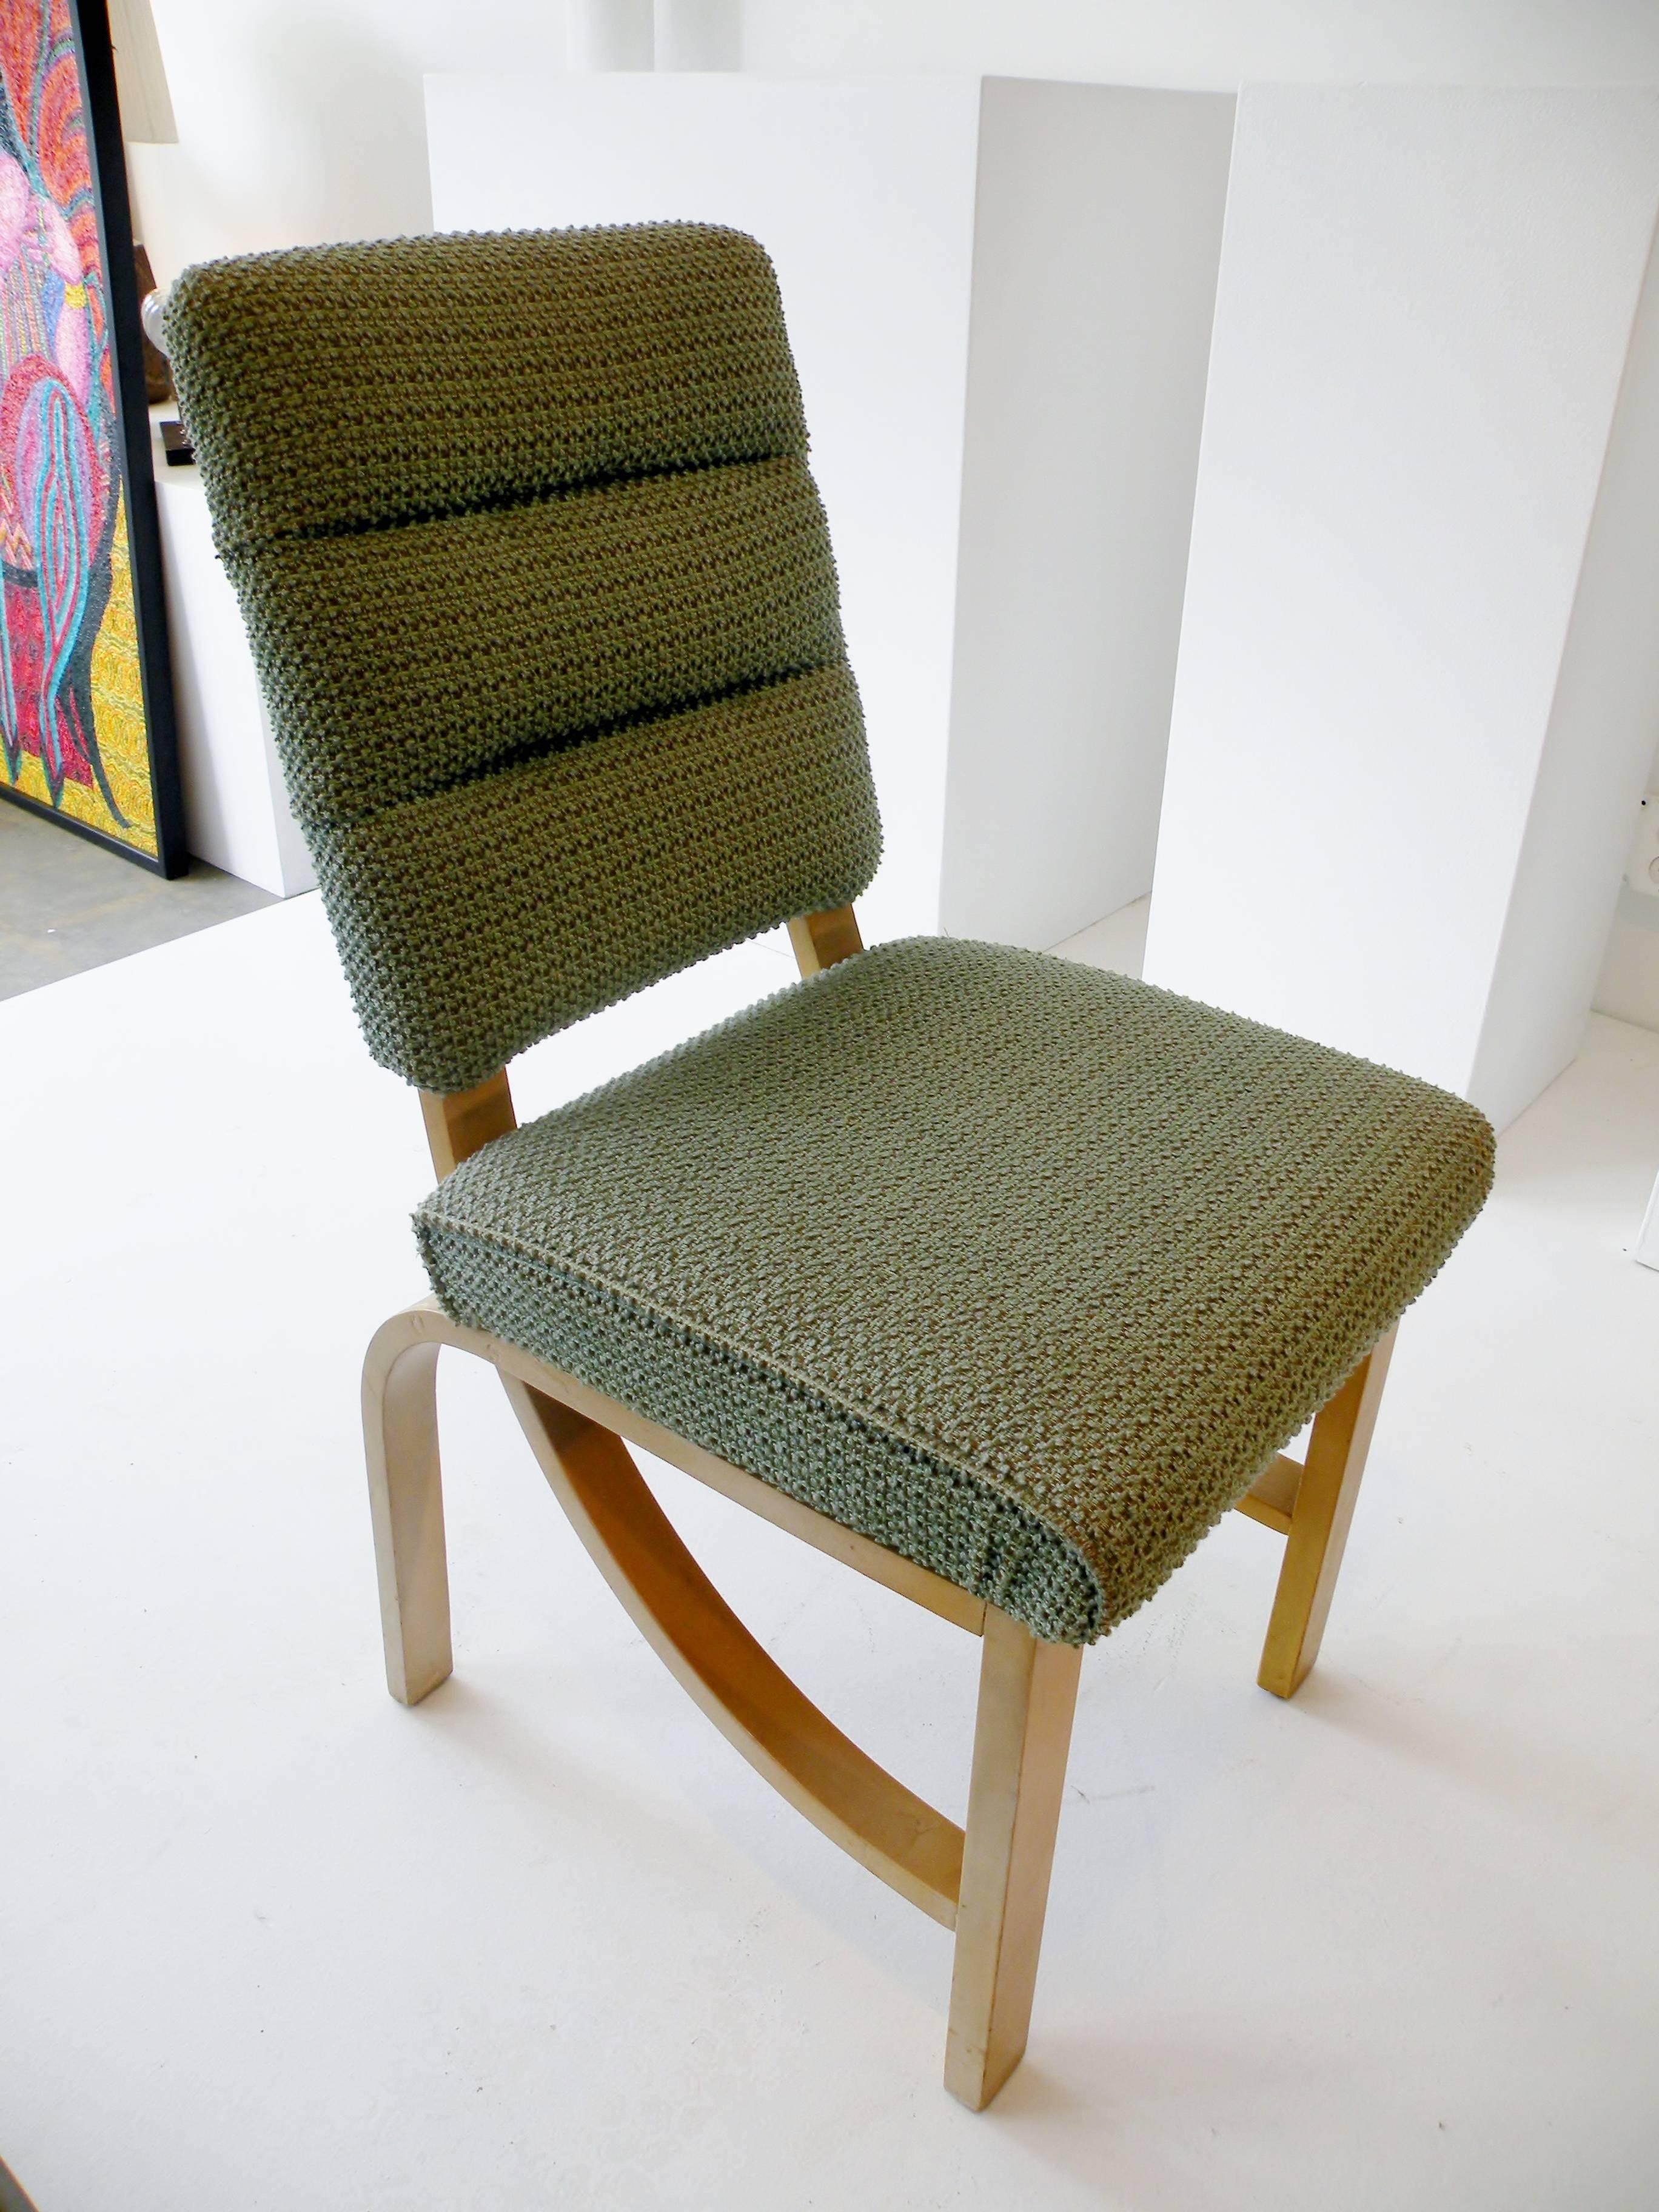 An early side chair in original condition and upholstery. Dating to the 1940s the transitional design crosses streamline moderne Art Deco lines with emerging midcentury simplicity.